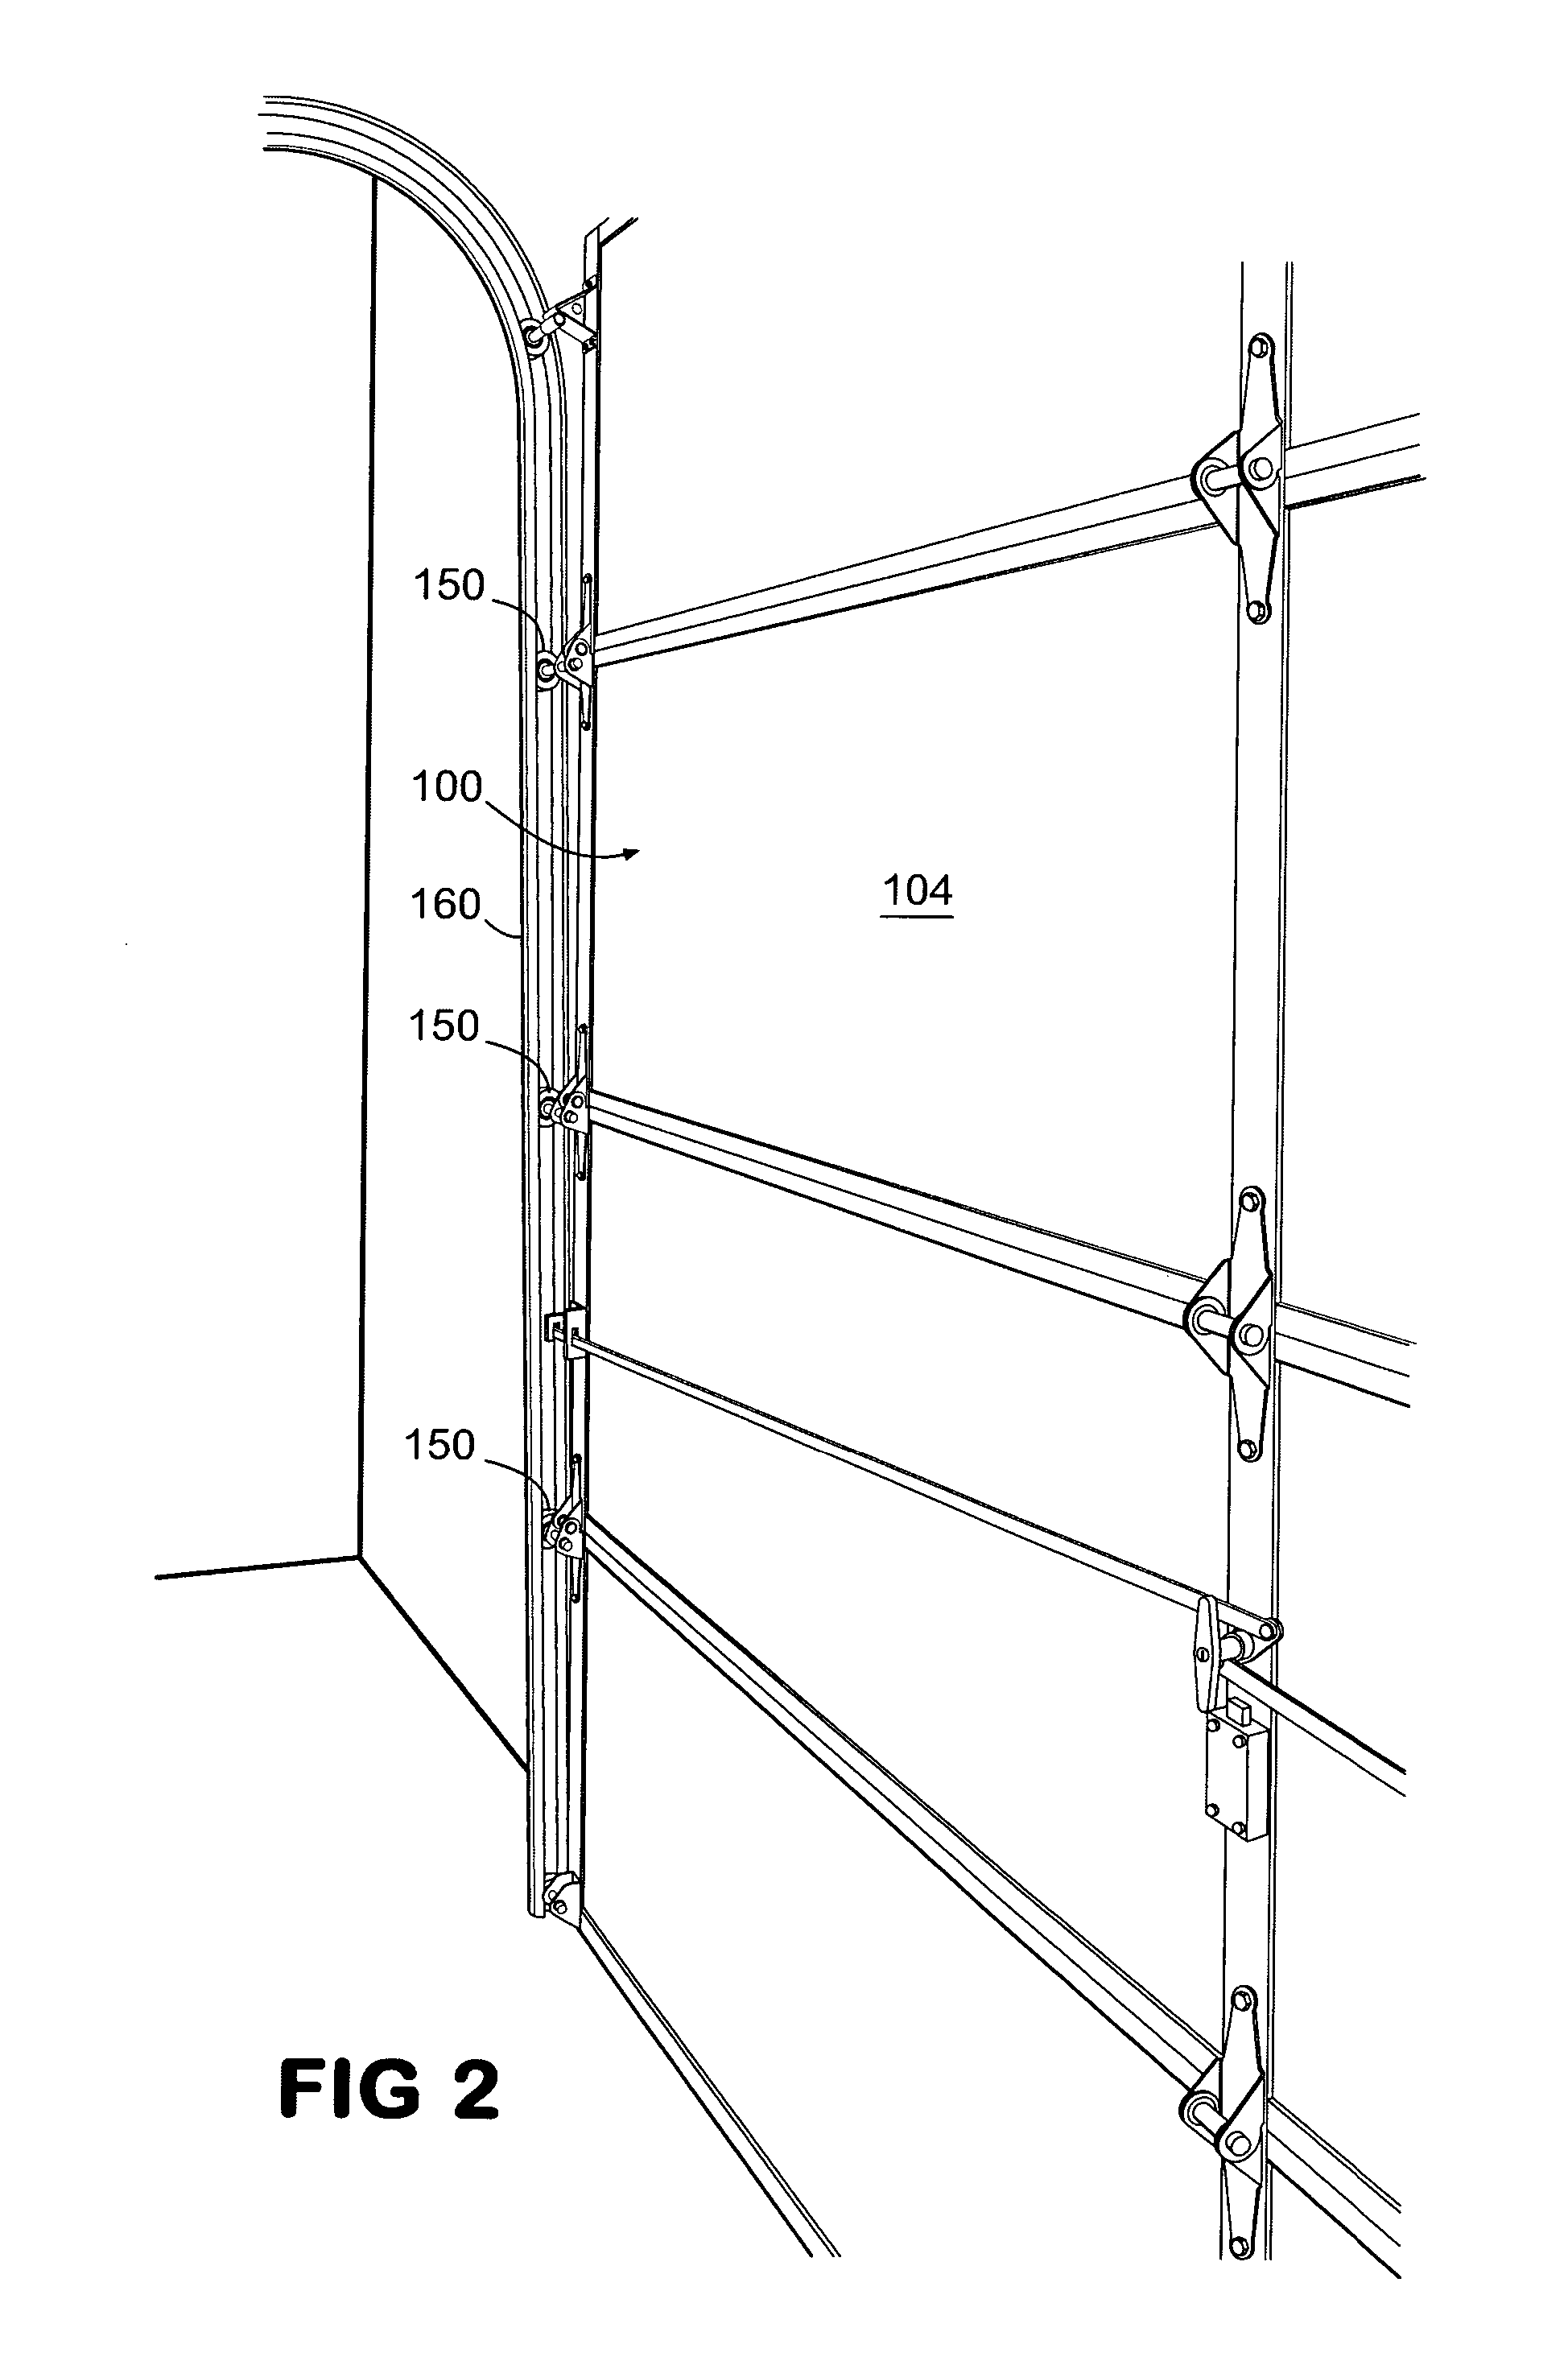 Actuator for improving seal for overhead doors